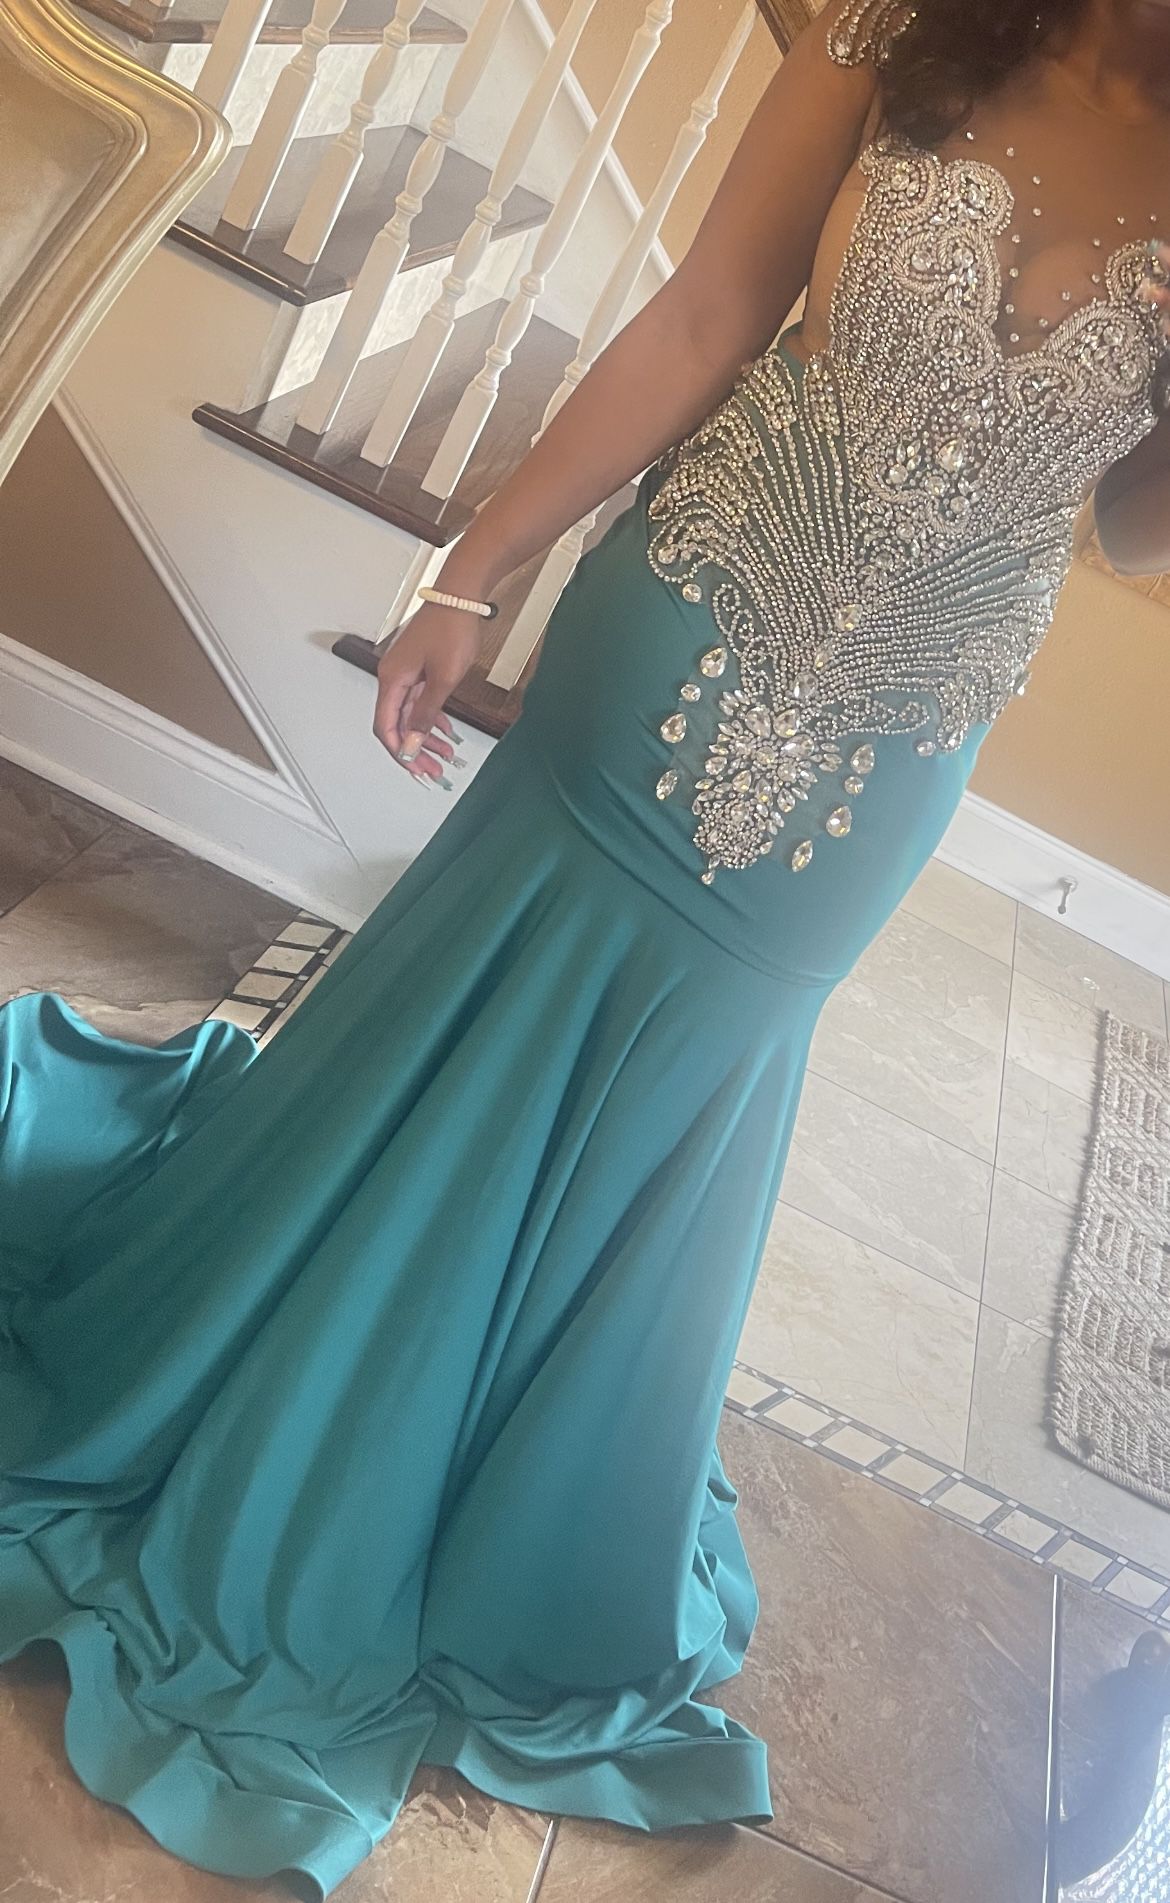  Beautiful luxurious long teal prom dress with rhinestone details  